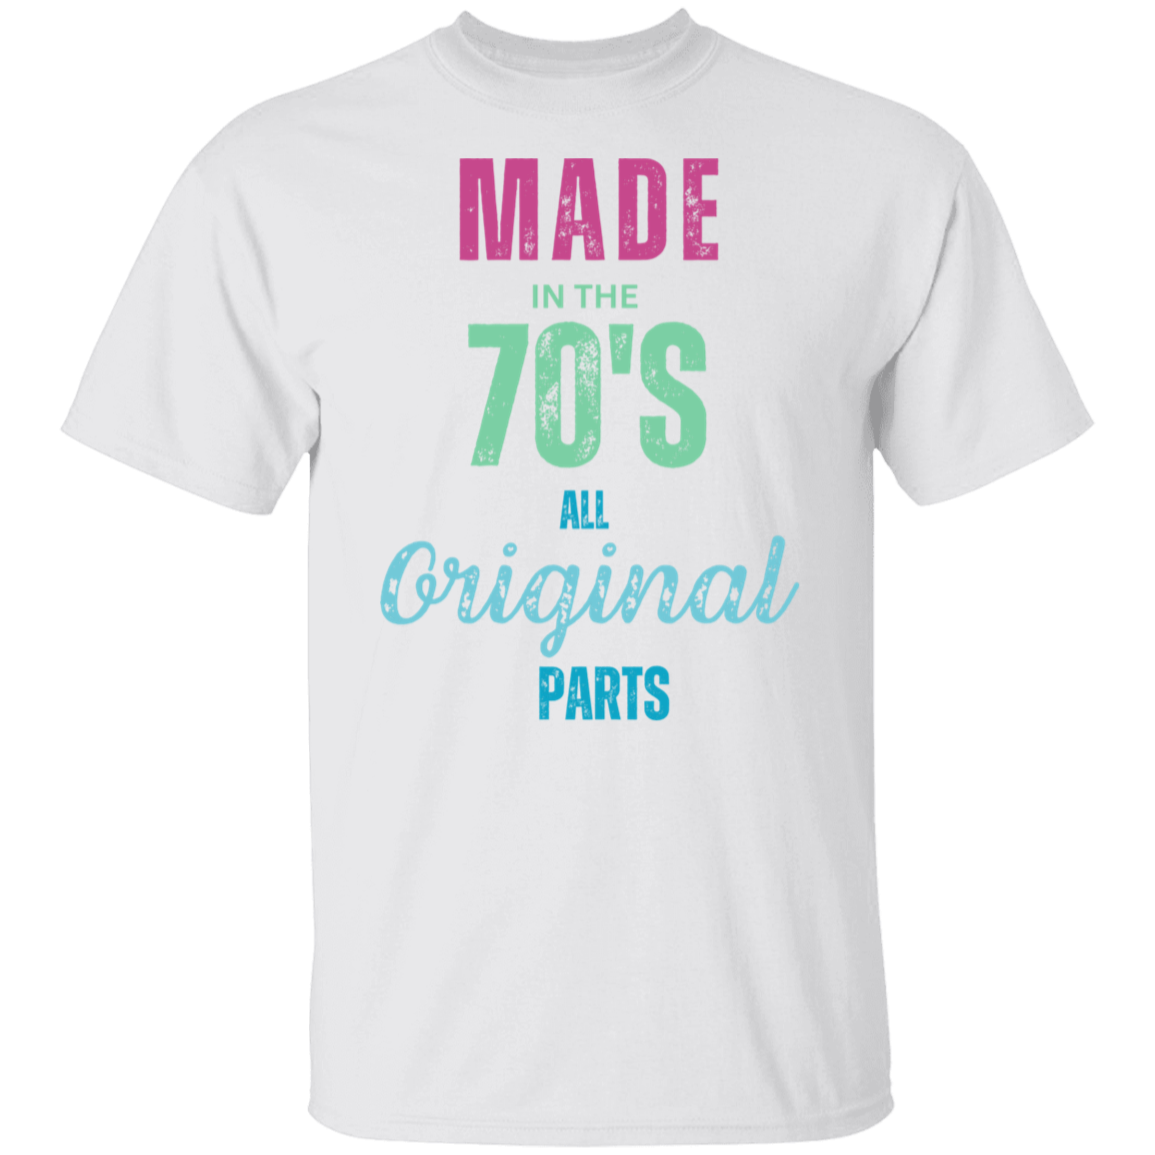 MADE IN THE 70'S  5.3 oz. T-Shirt